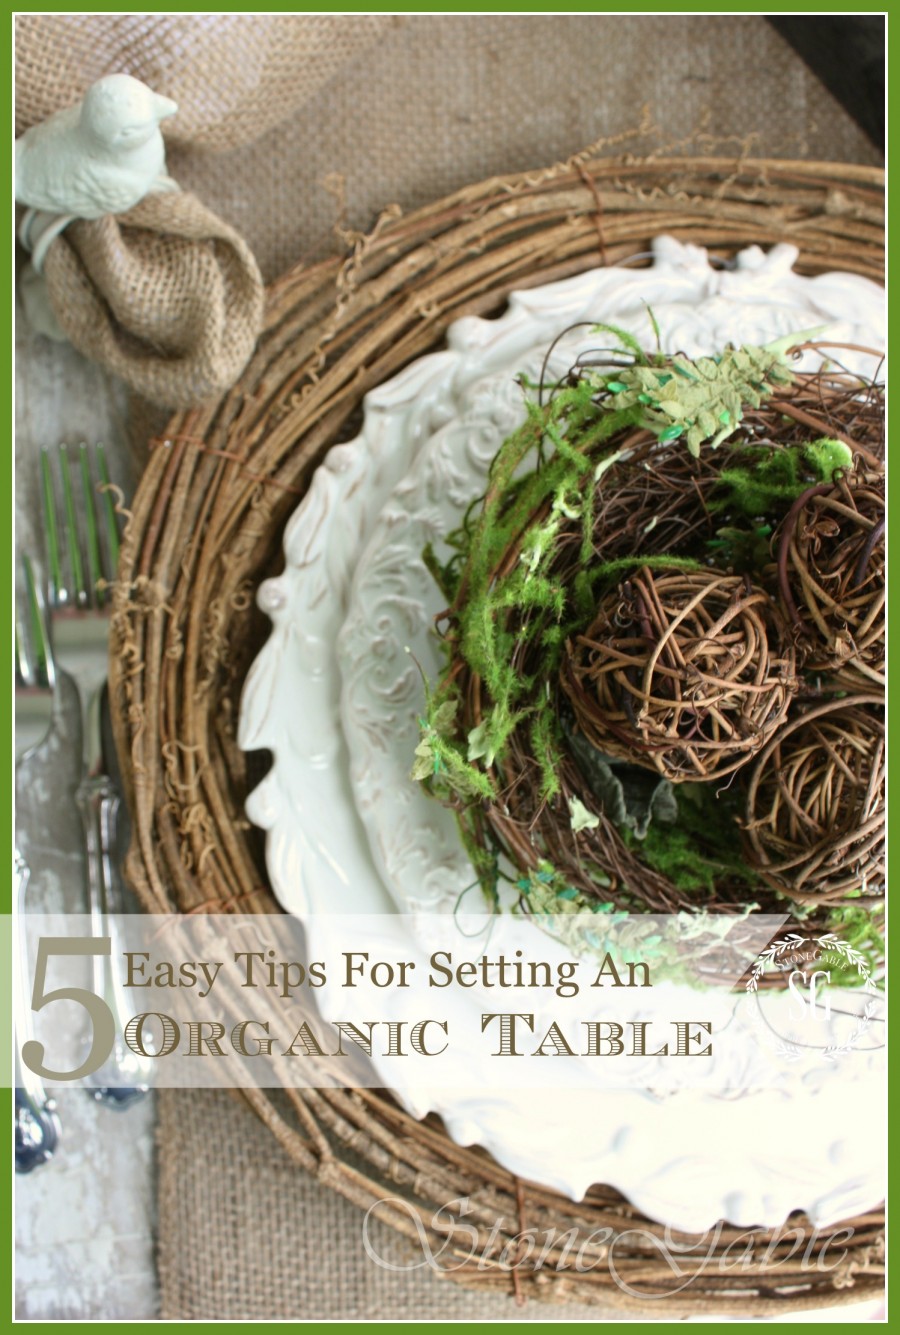 5 EASY TIPS FOR SETTING AN ORGANIC TABLE